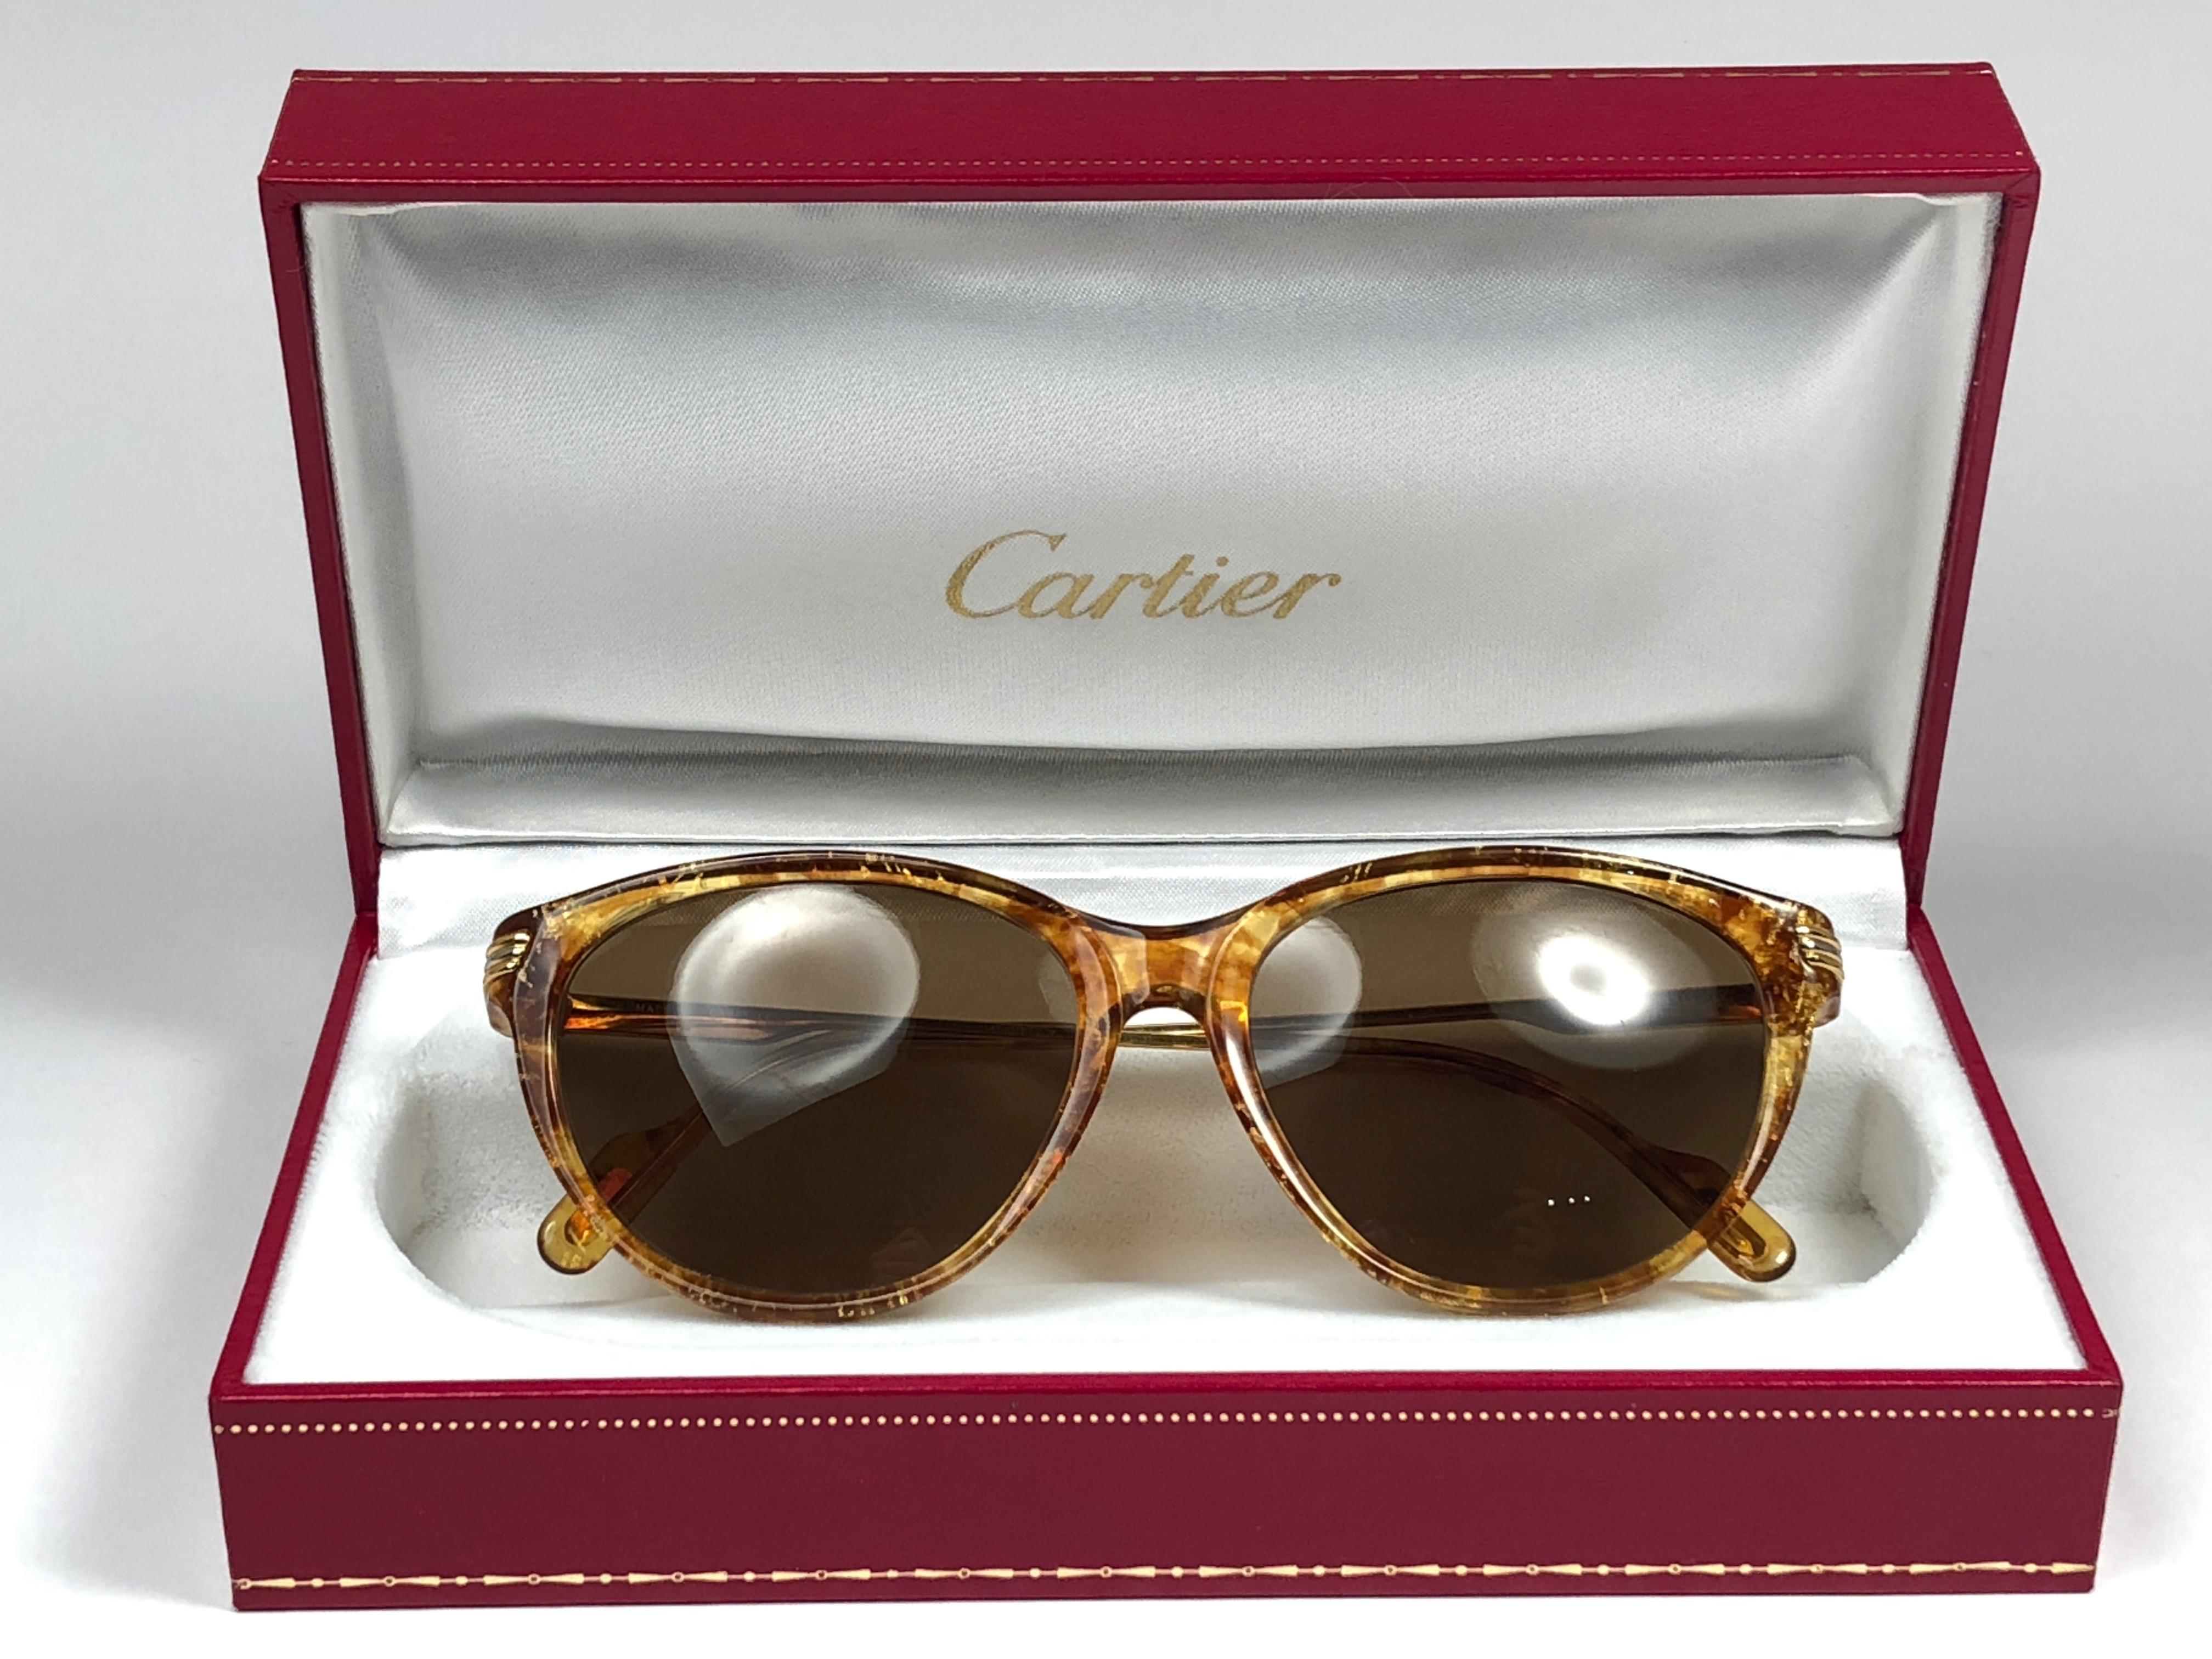 
New Cartier Eclat Classic sunglasses with brown (uv protection) lenses. Small size 53mm/15 frame has the famous real gold and white gold accents on the temples. 100% original. All hallmarks. Cartier gold signs on the earpaddles. These are like a